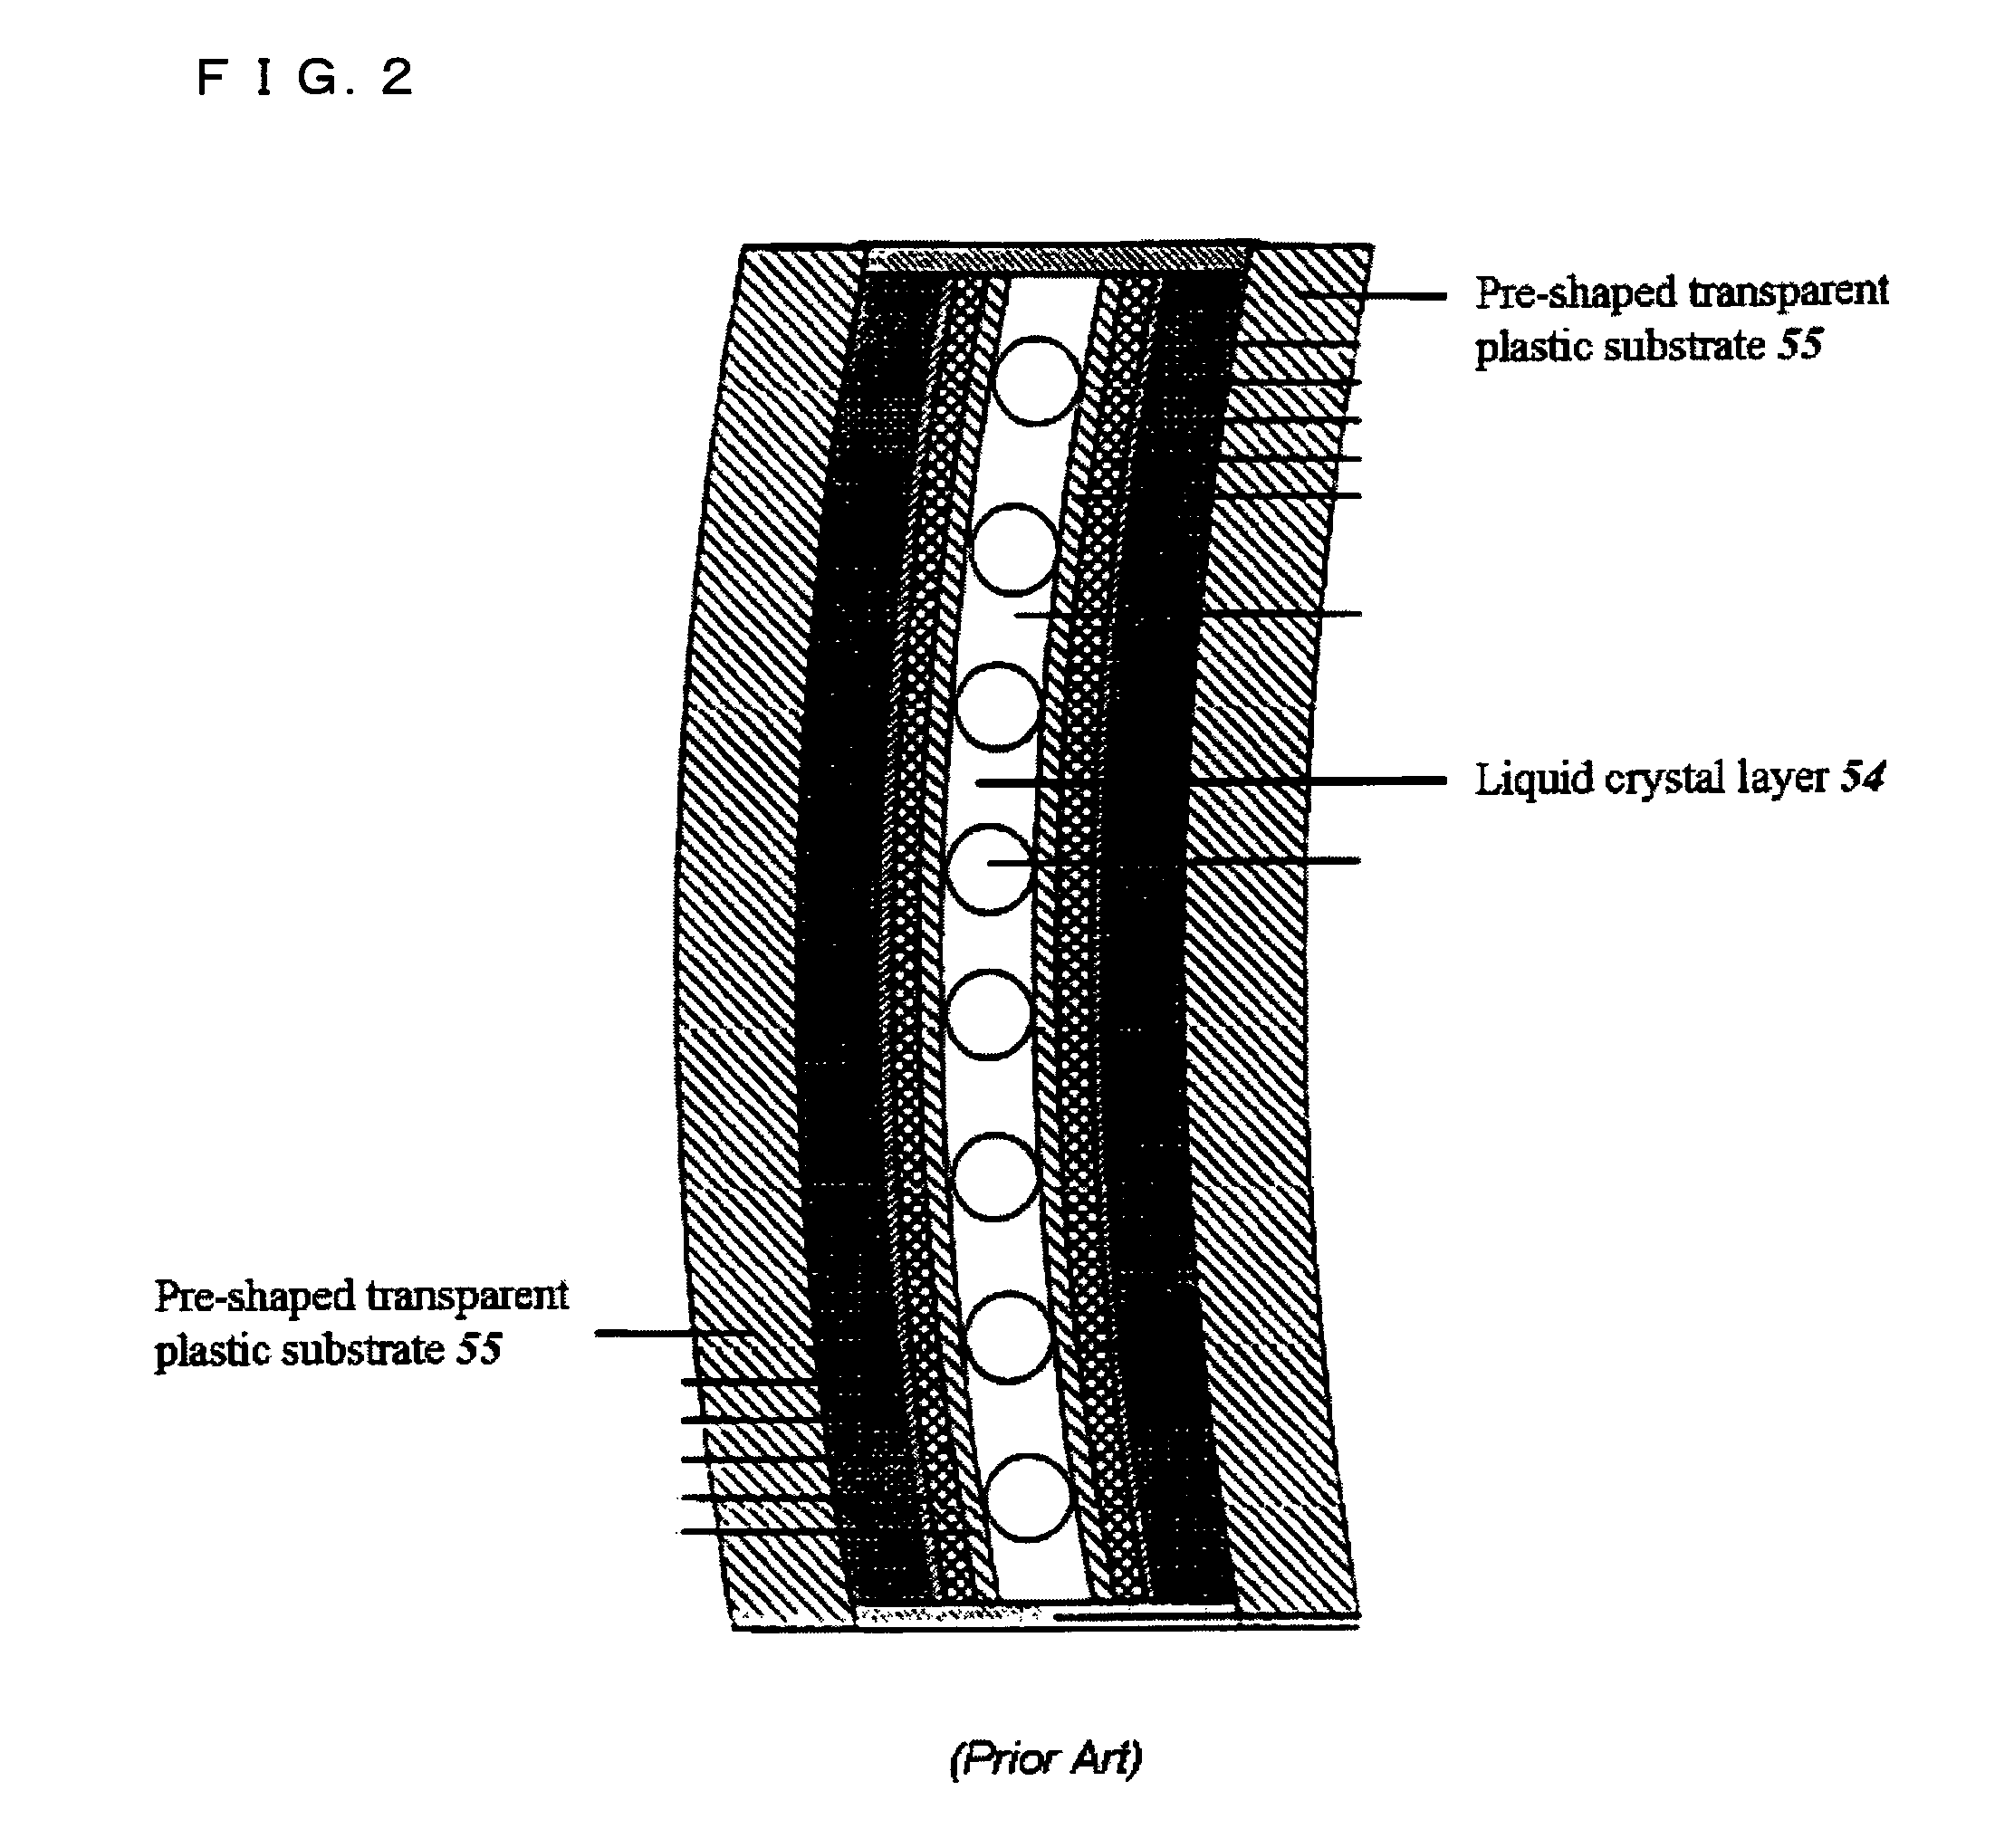 Optical system and display that converts a flat image to a non-flat image